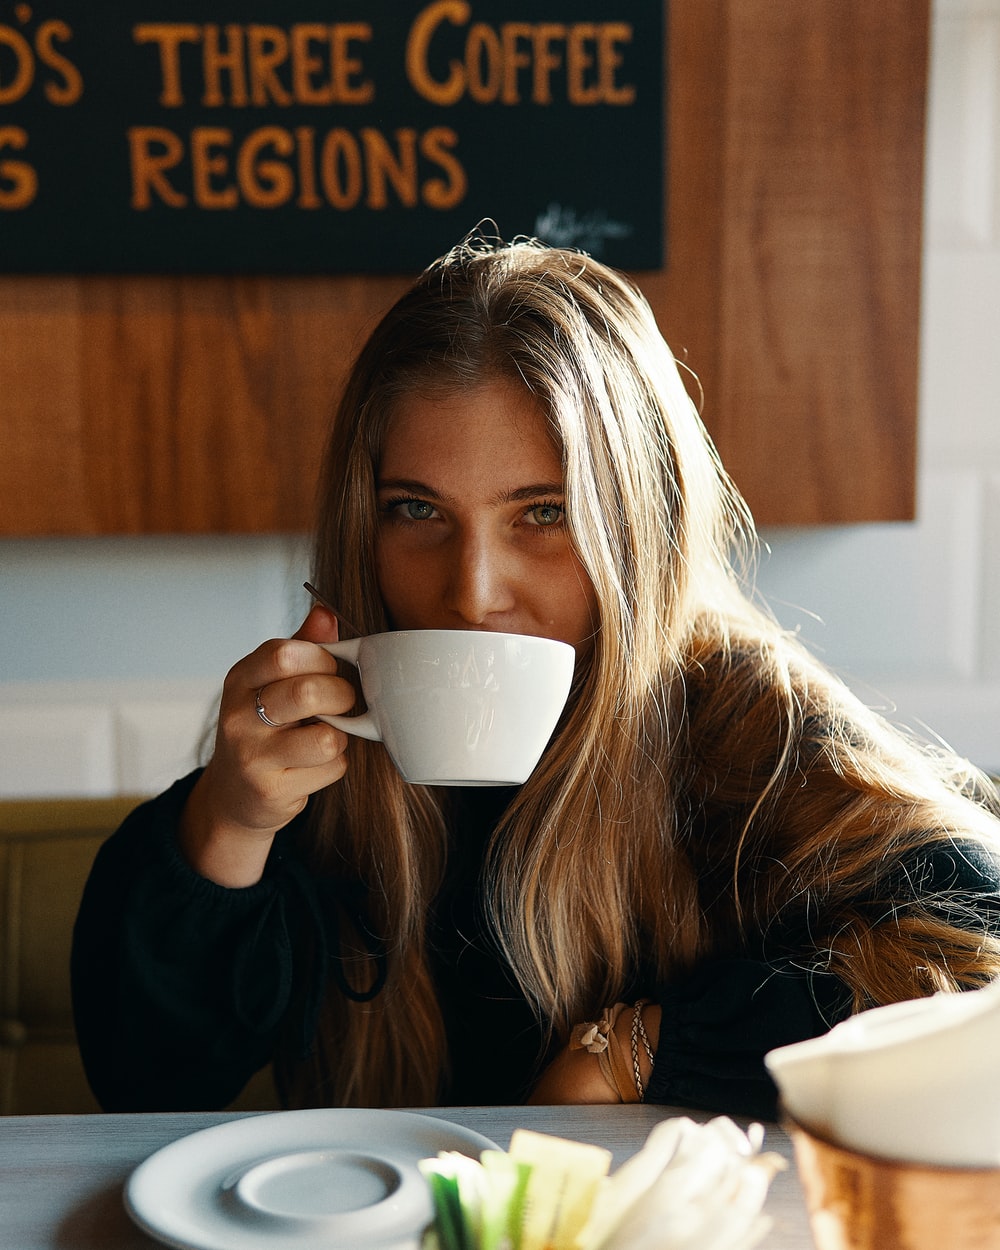 Girl With Coffee Picture. Download Free Image